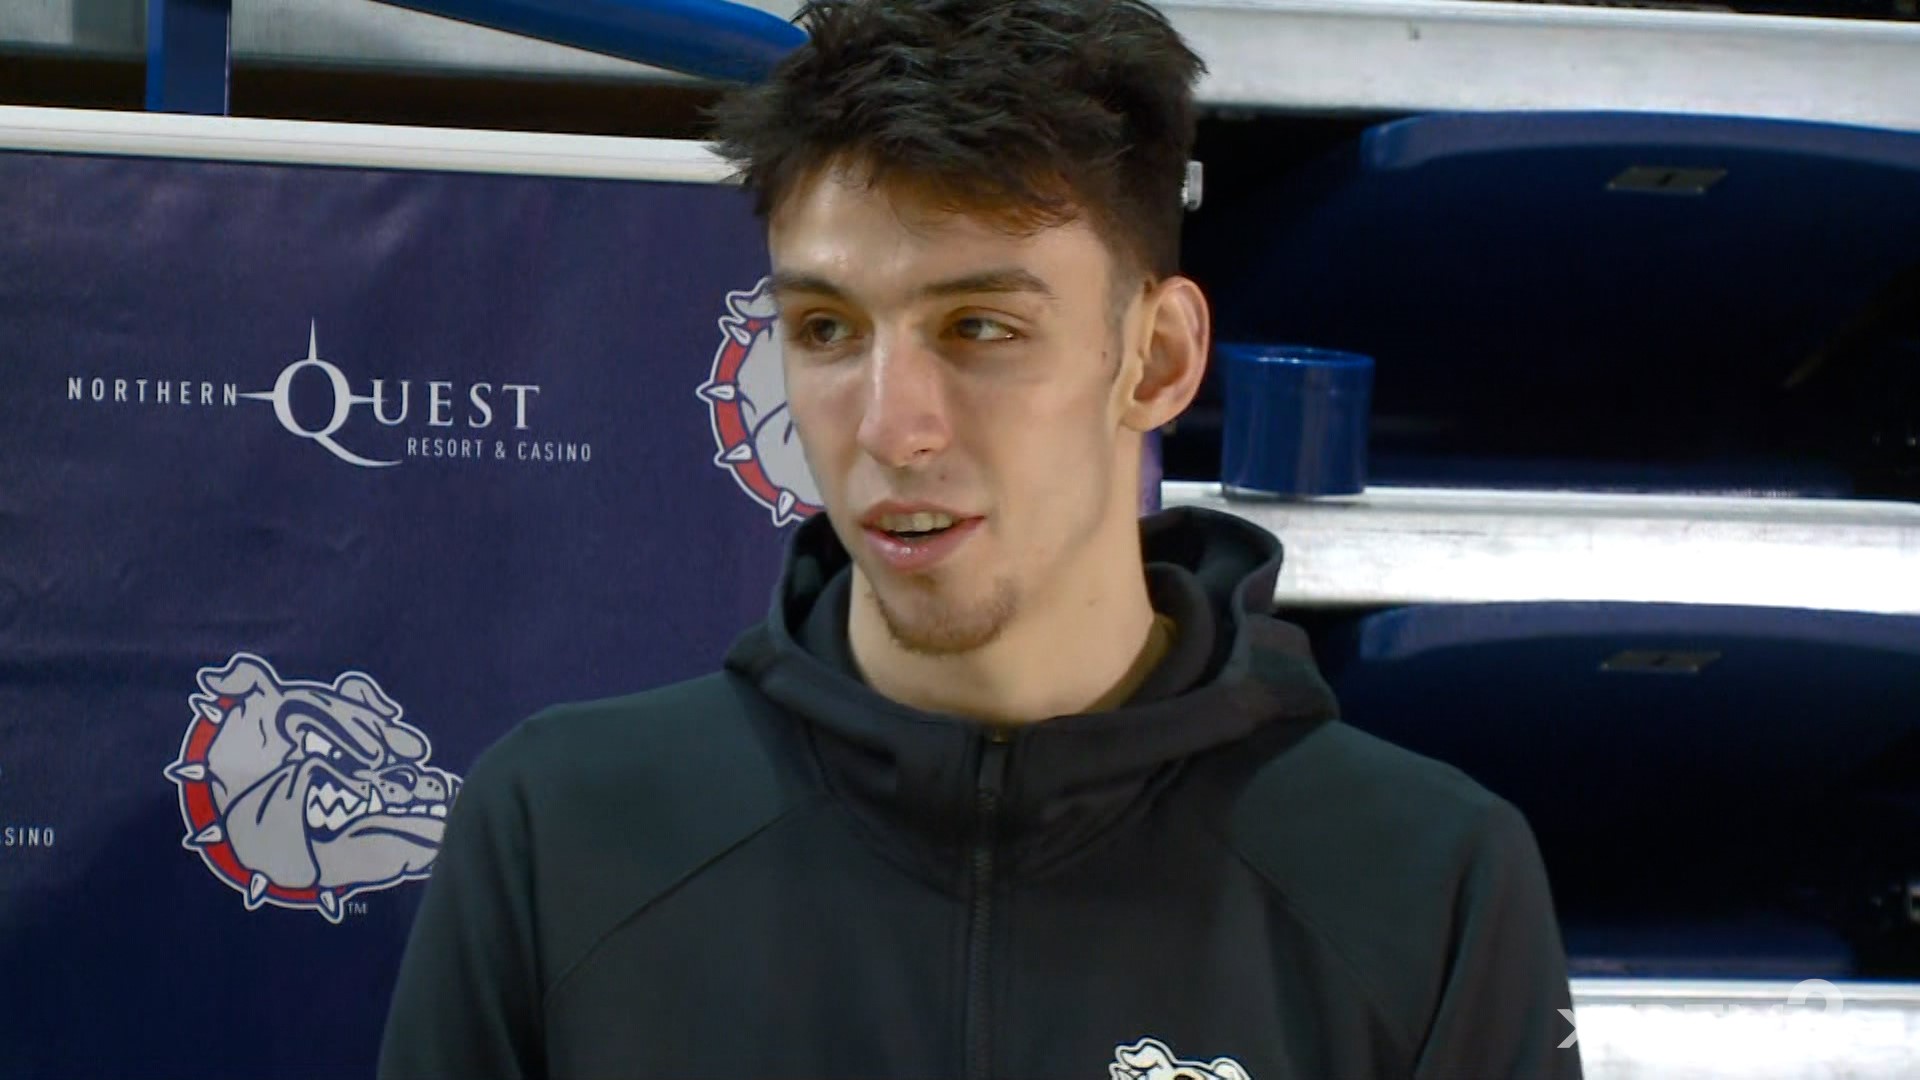 The Gonzaga Men's Basketball team talks about the NCAA Tournament on Selection Sunday. Hear from Chet Holmgren, Drew Timme, Andrew Nembhard, Coach Mark Few, and more